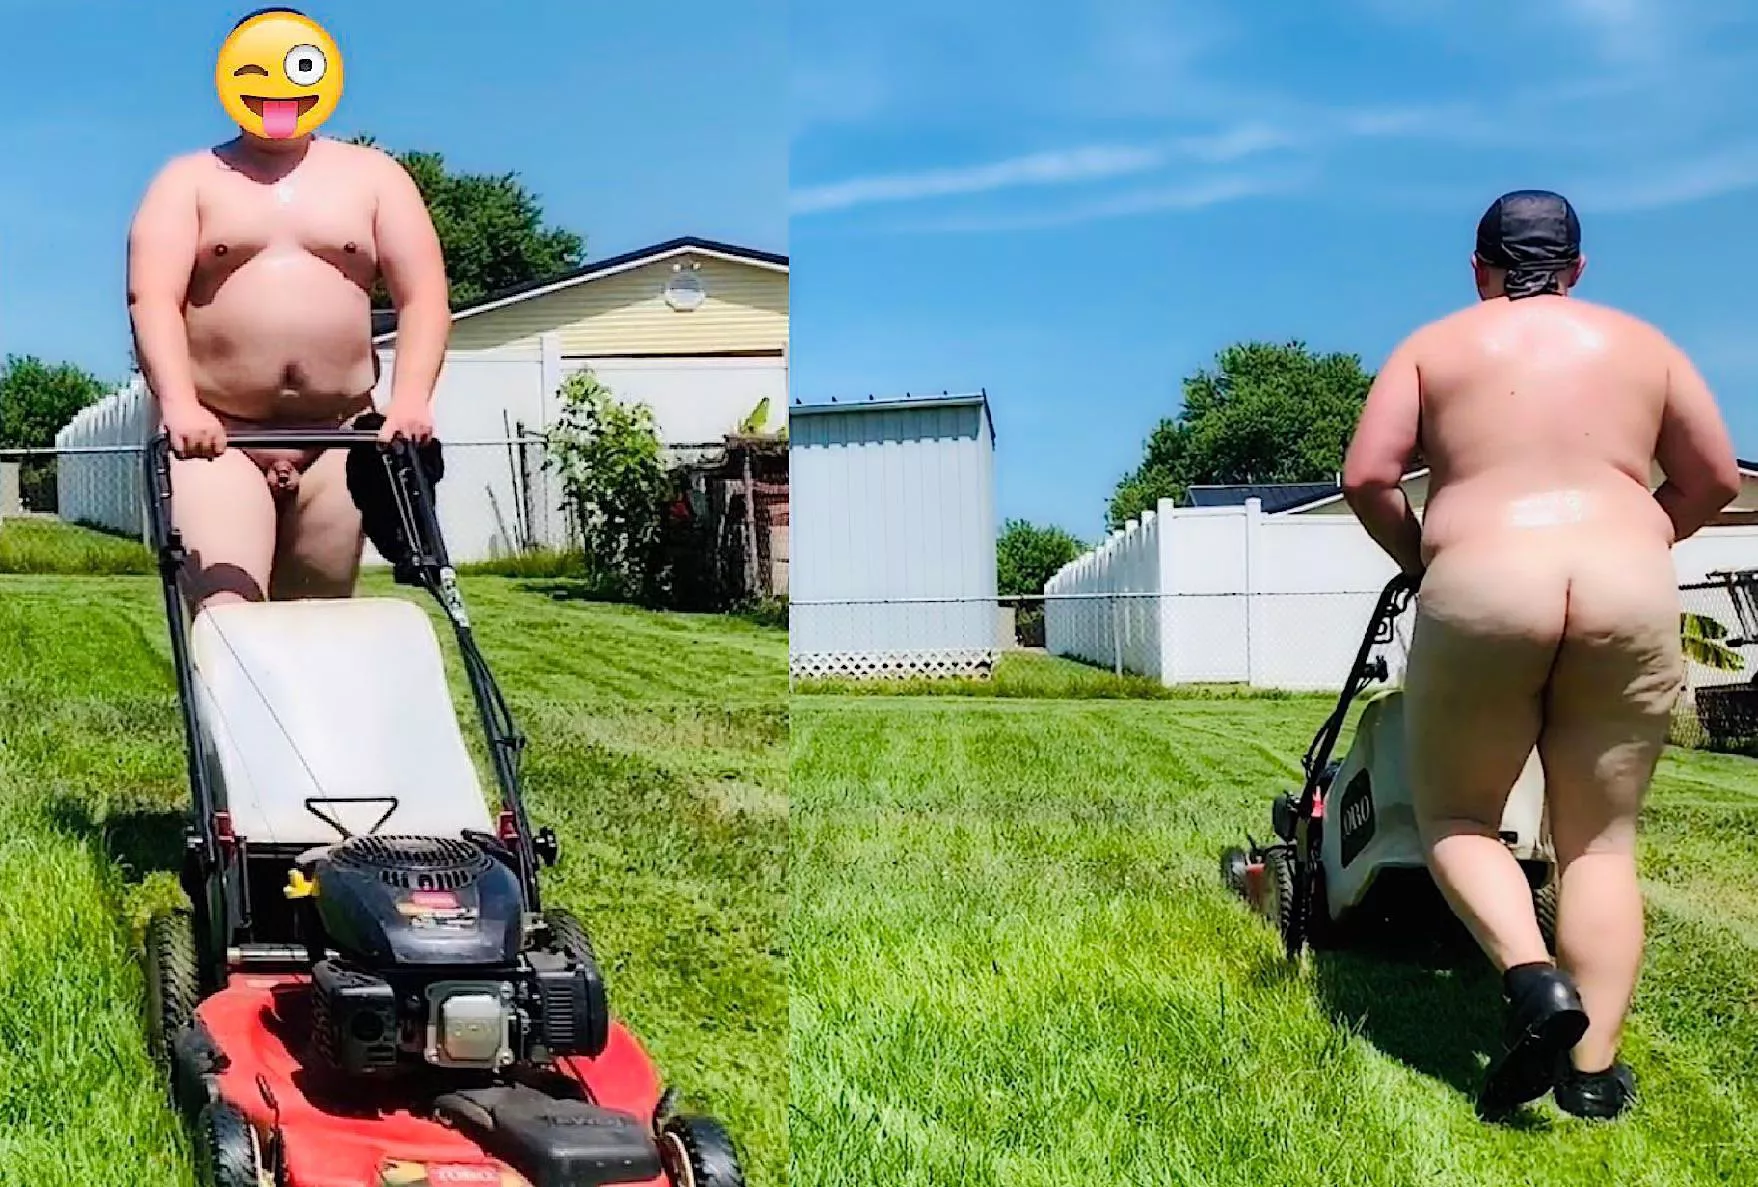 mowing,grass,naked.